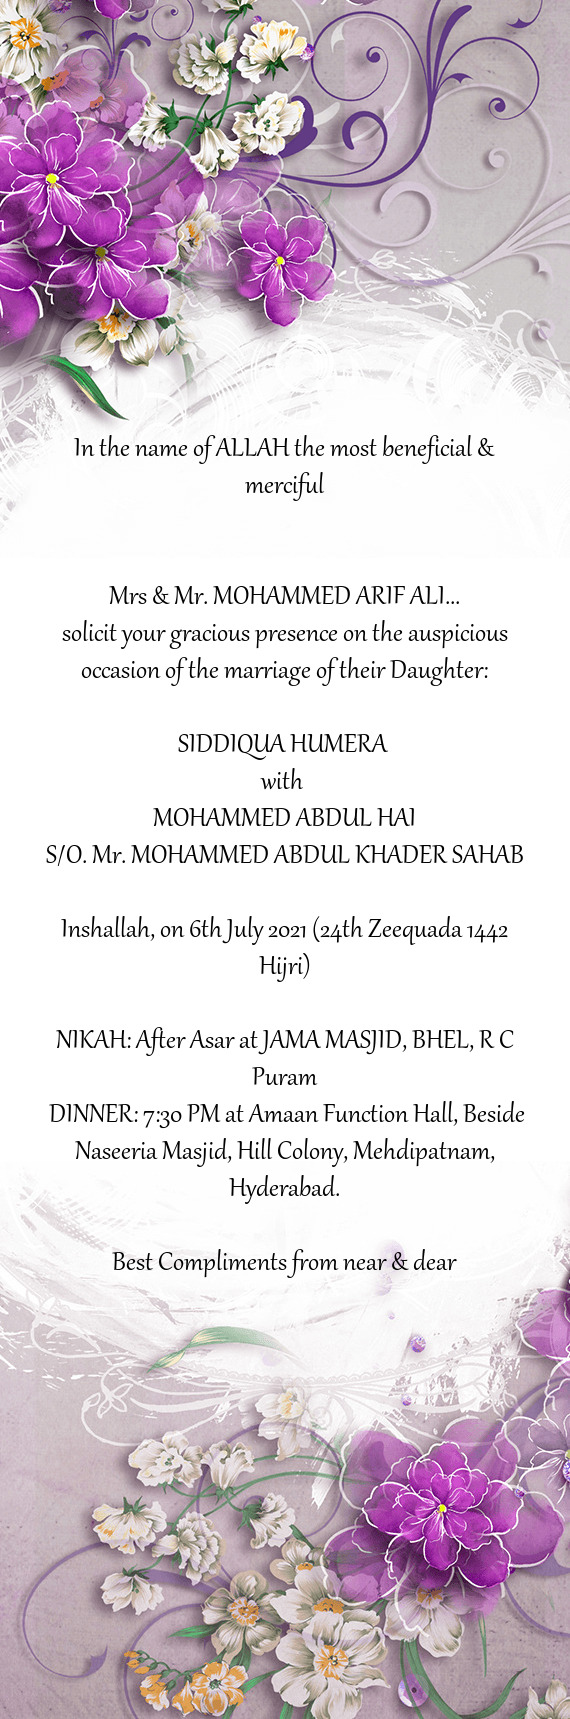 Solicit your gracious presence on the auspicious occasion of the marriage of their Daughter: